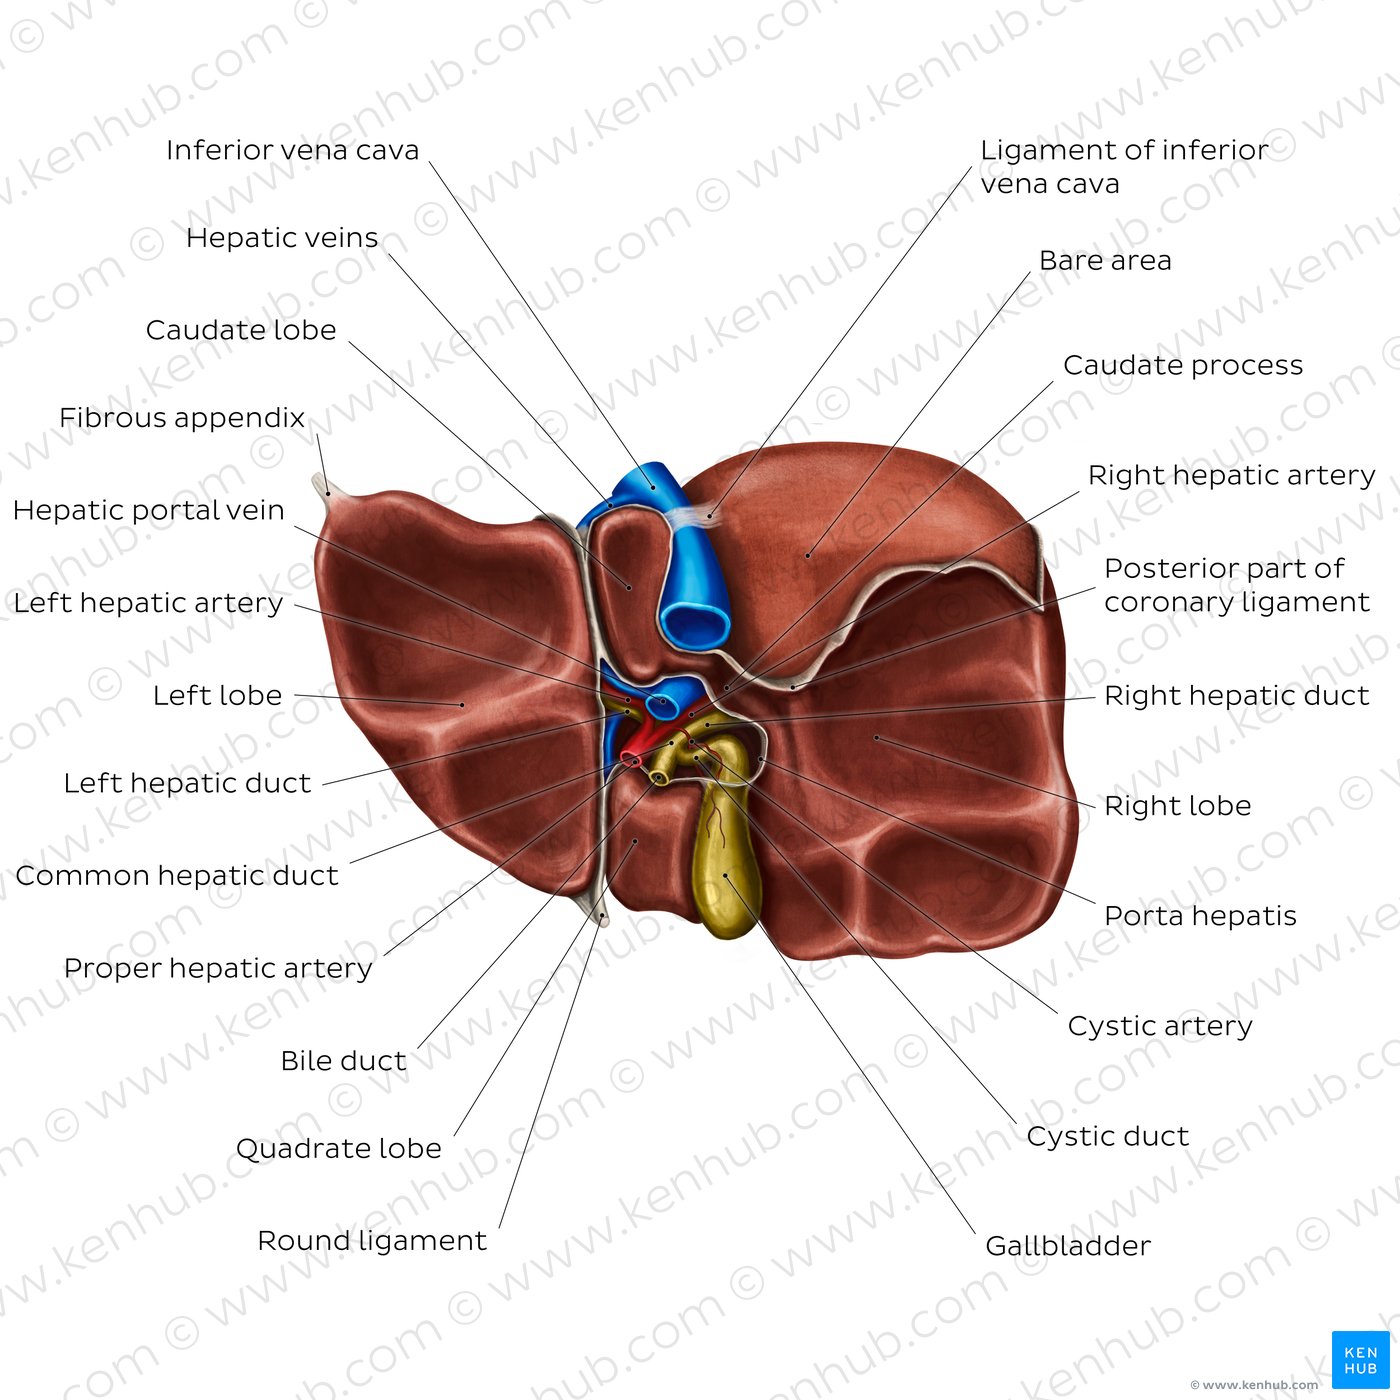 Inferior view of the liver